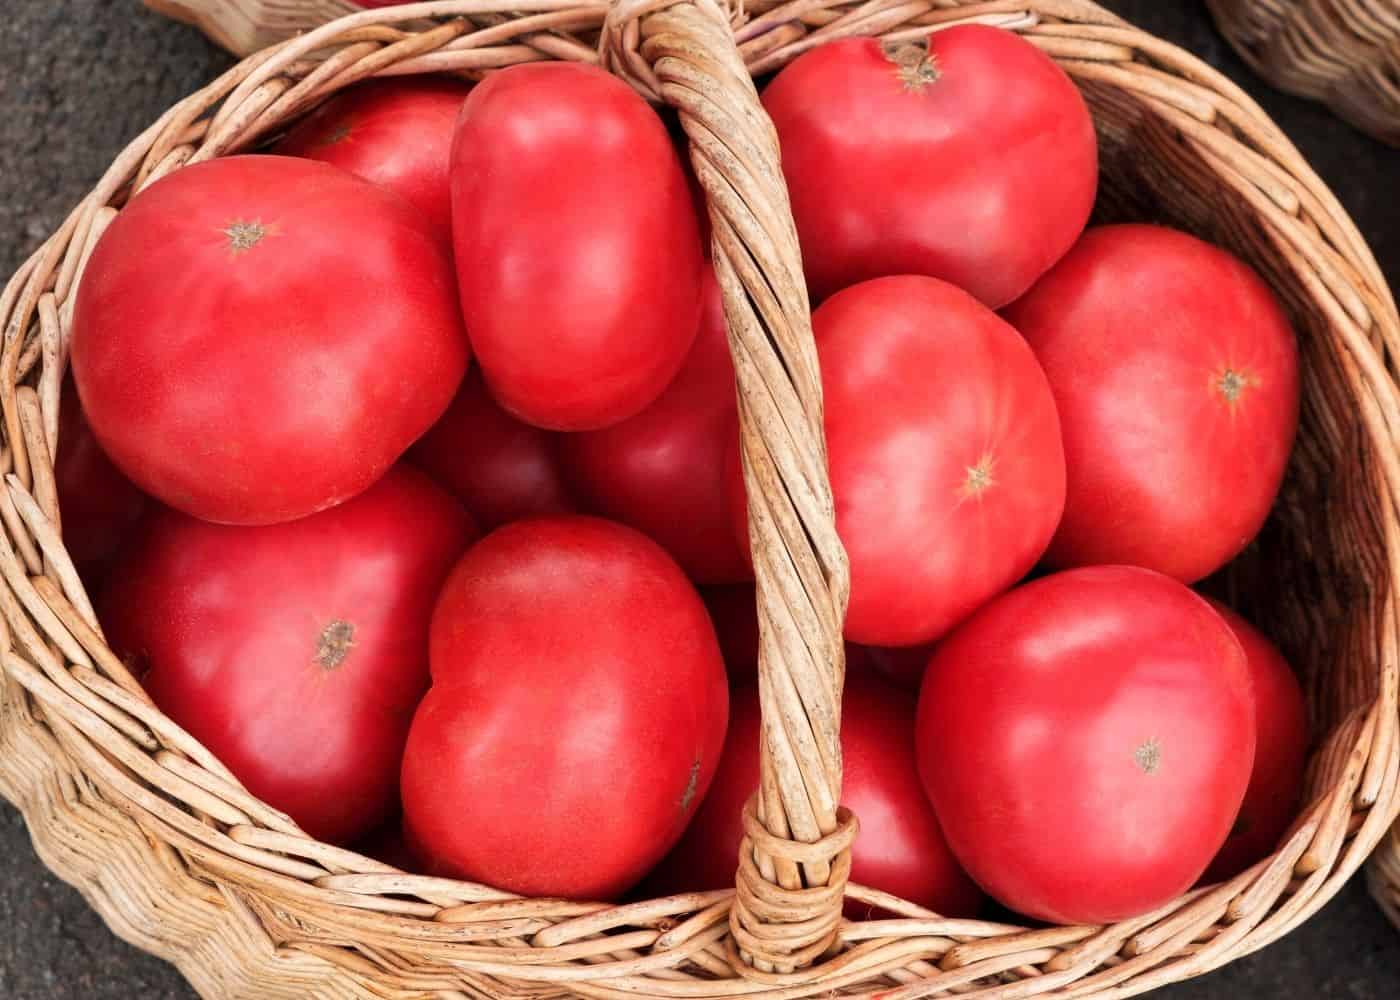 Try Unique, Delicious Teddy Jones Tomato - Easy to Grow with VF Resistance & Great Flavor!